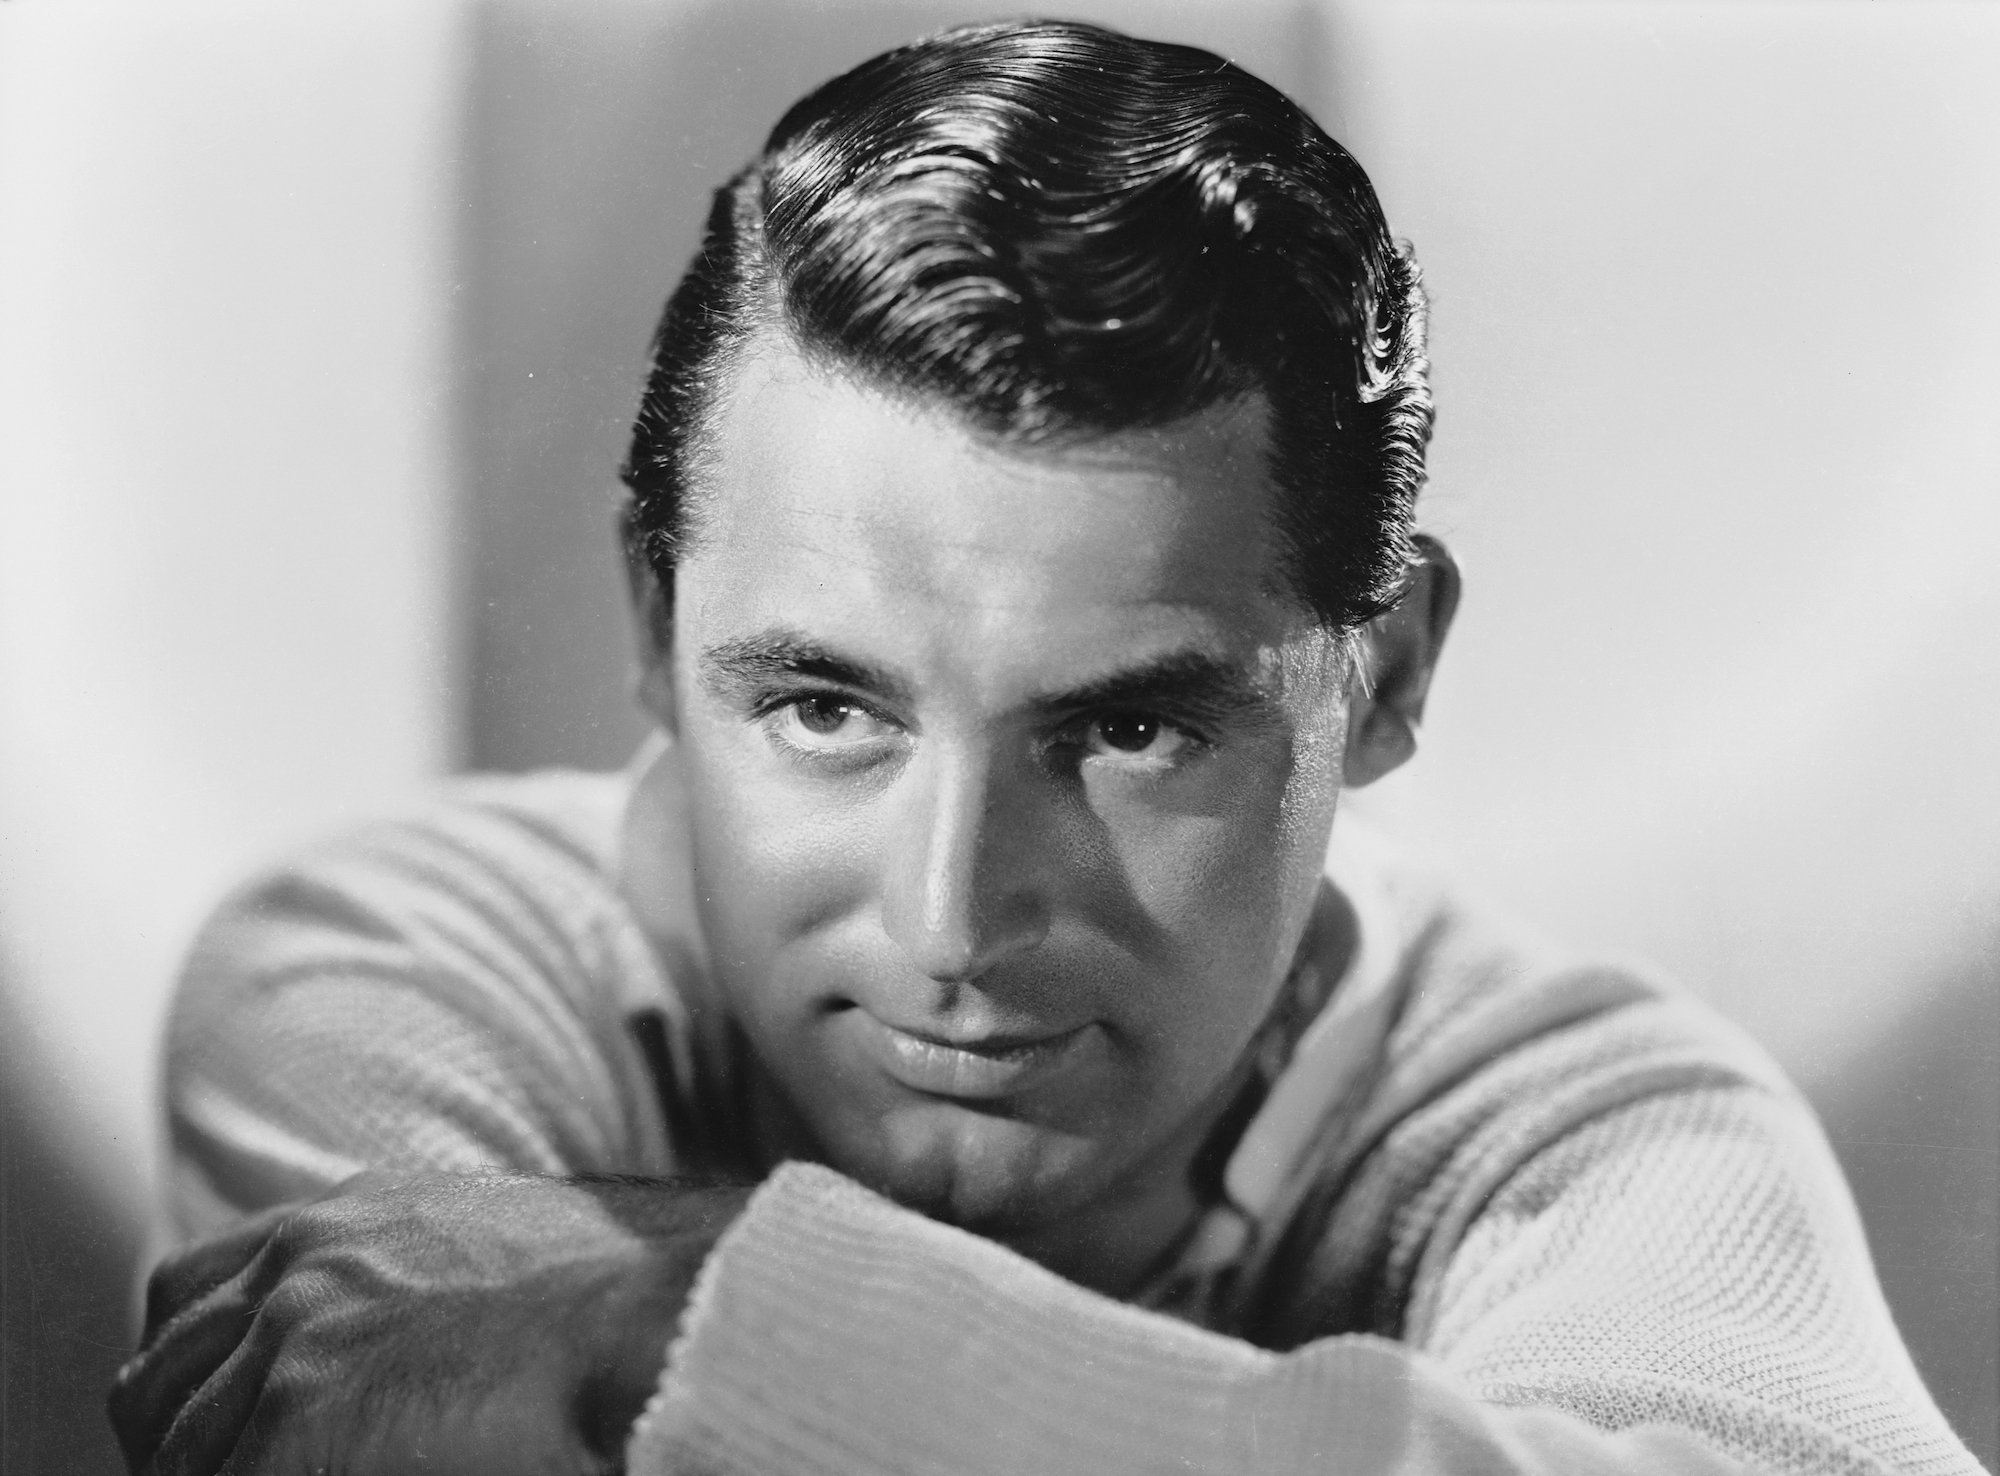 Cary Grant leaning on his folded hands, looking to the left, in black and white